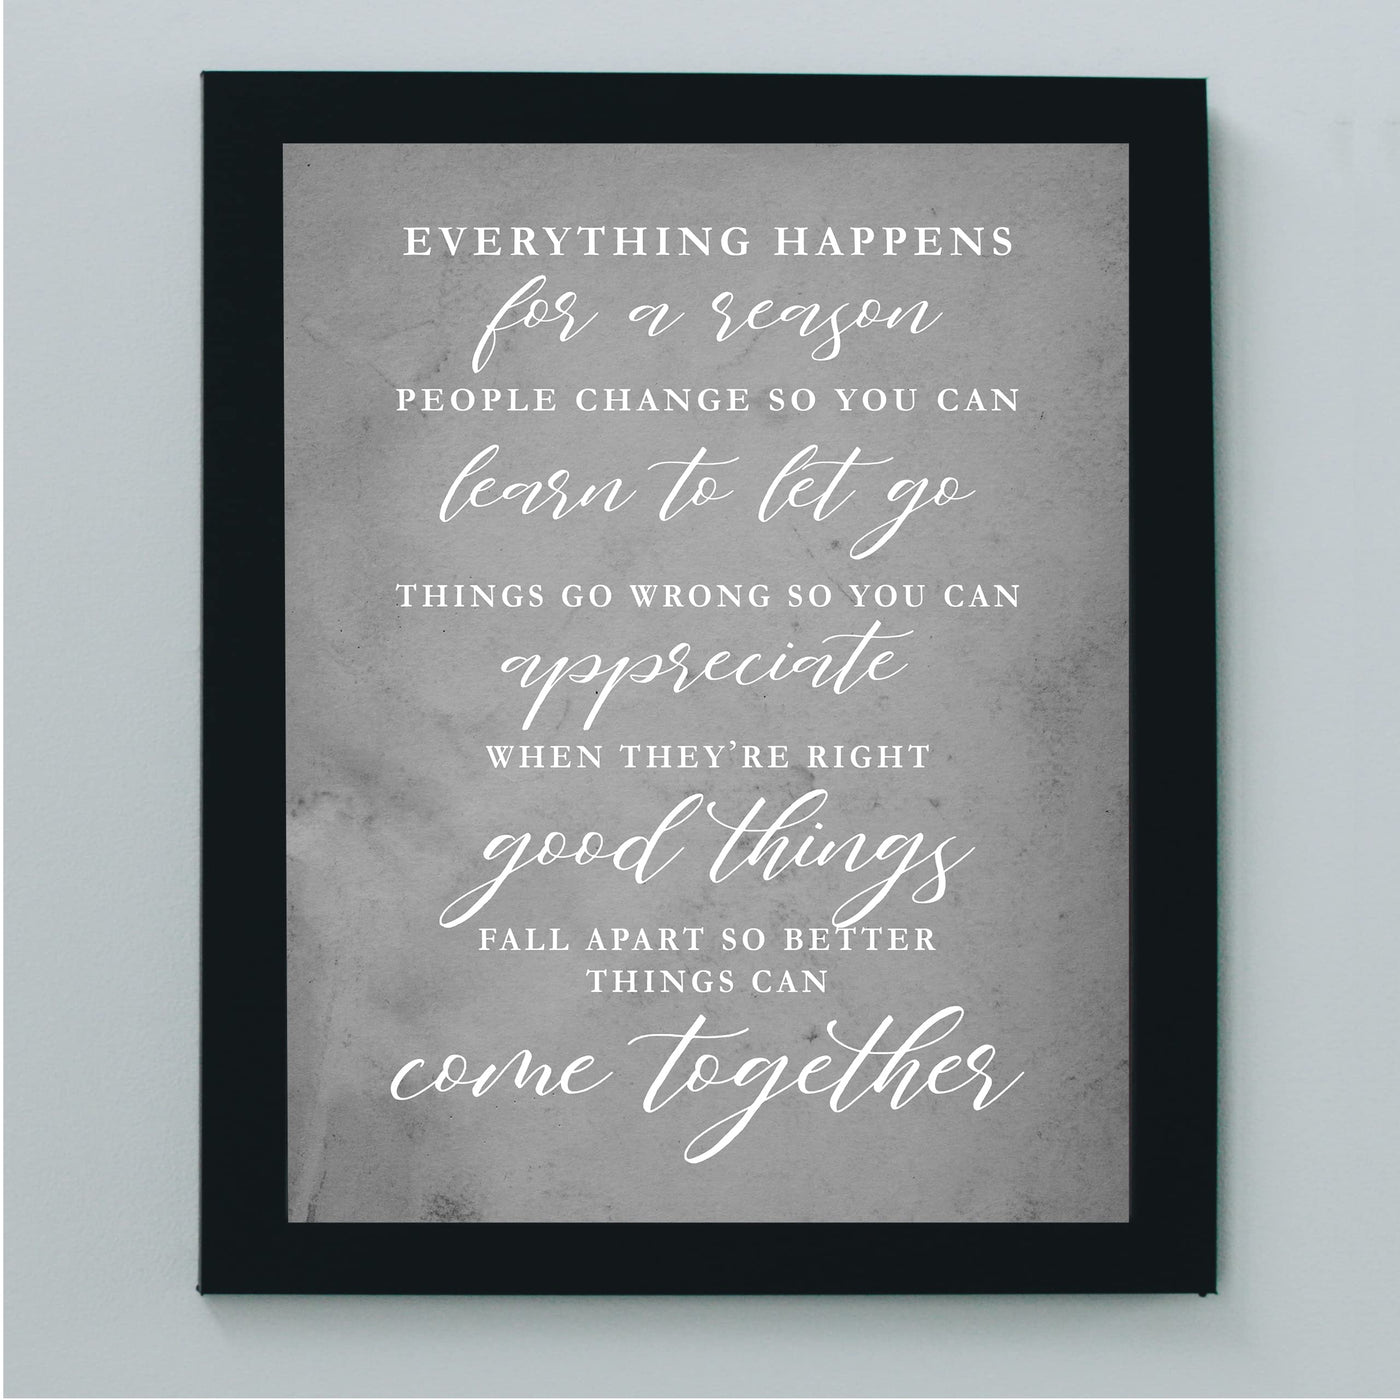 "Everything Happens For a Reason" Inspirational Quotes Wall Decor -8x10" Motivational Art Print-Ready to Frame. Modern Farmhouse Decoration for Home-Office-Classroom Sign. Great Gift!